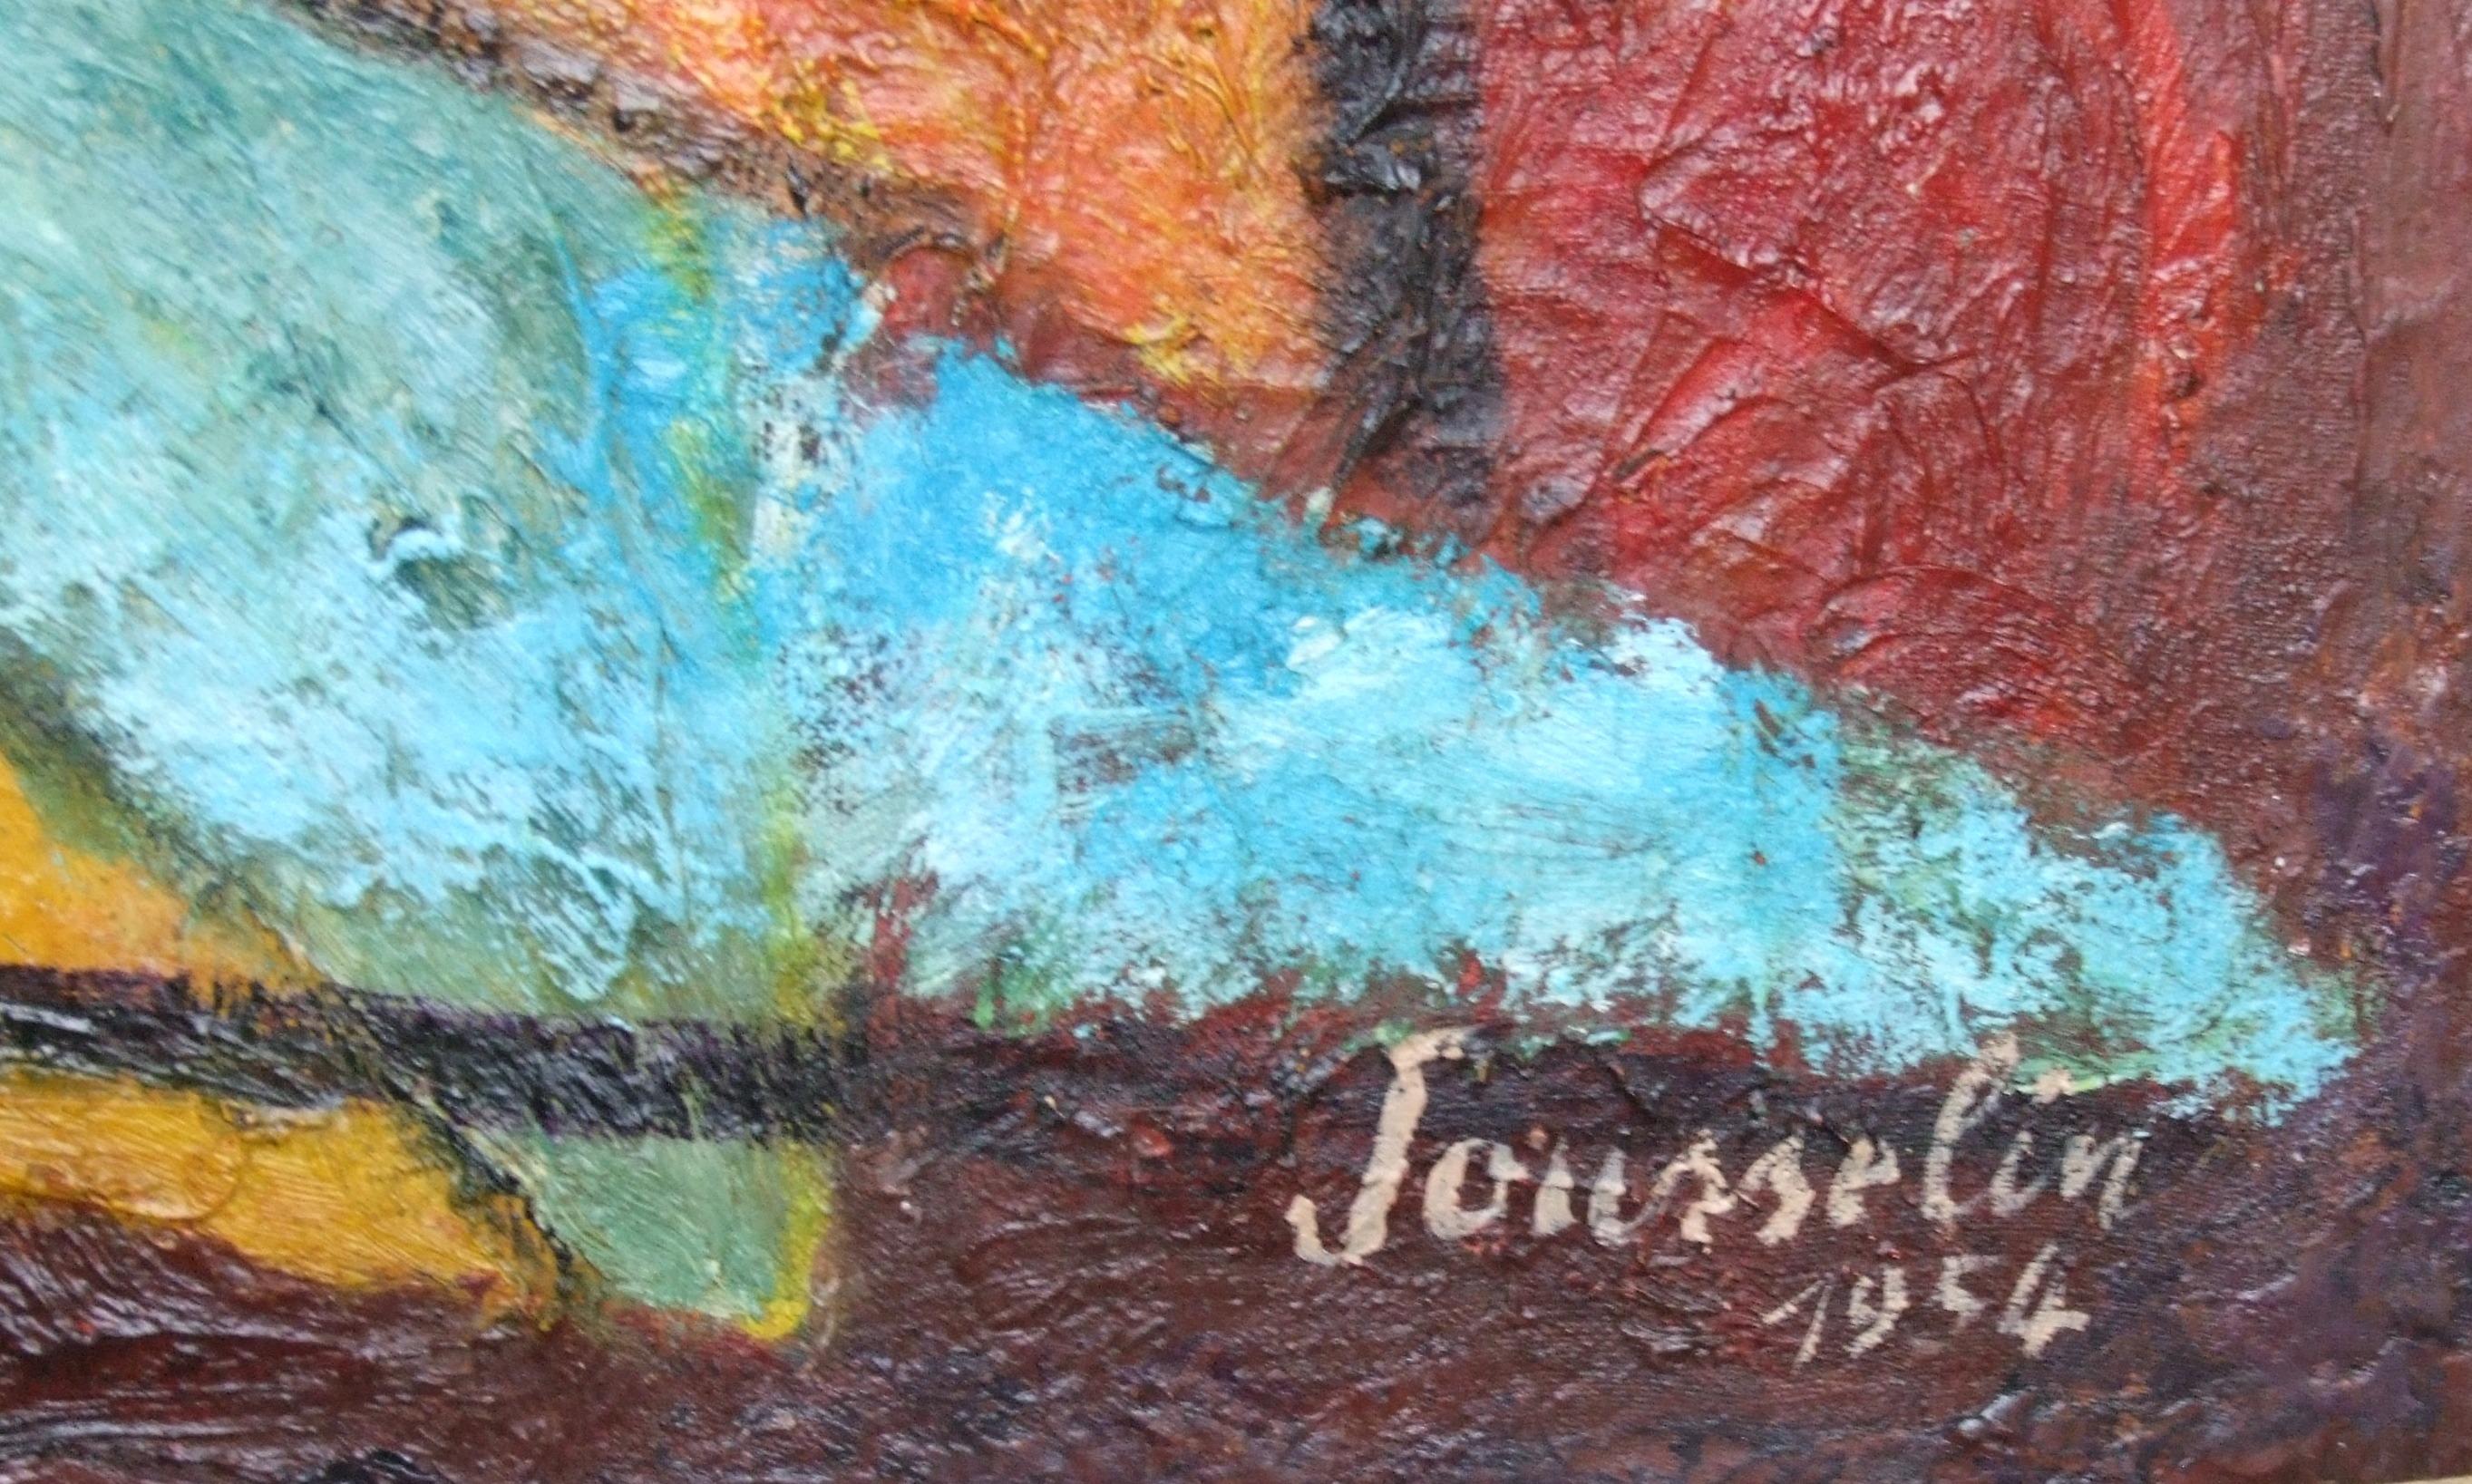 abstract 3, 1954 - Oil on canvas, 92x65 cm. - Painting by François Jousselin